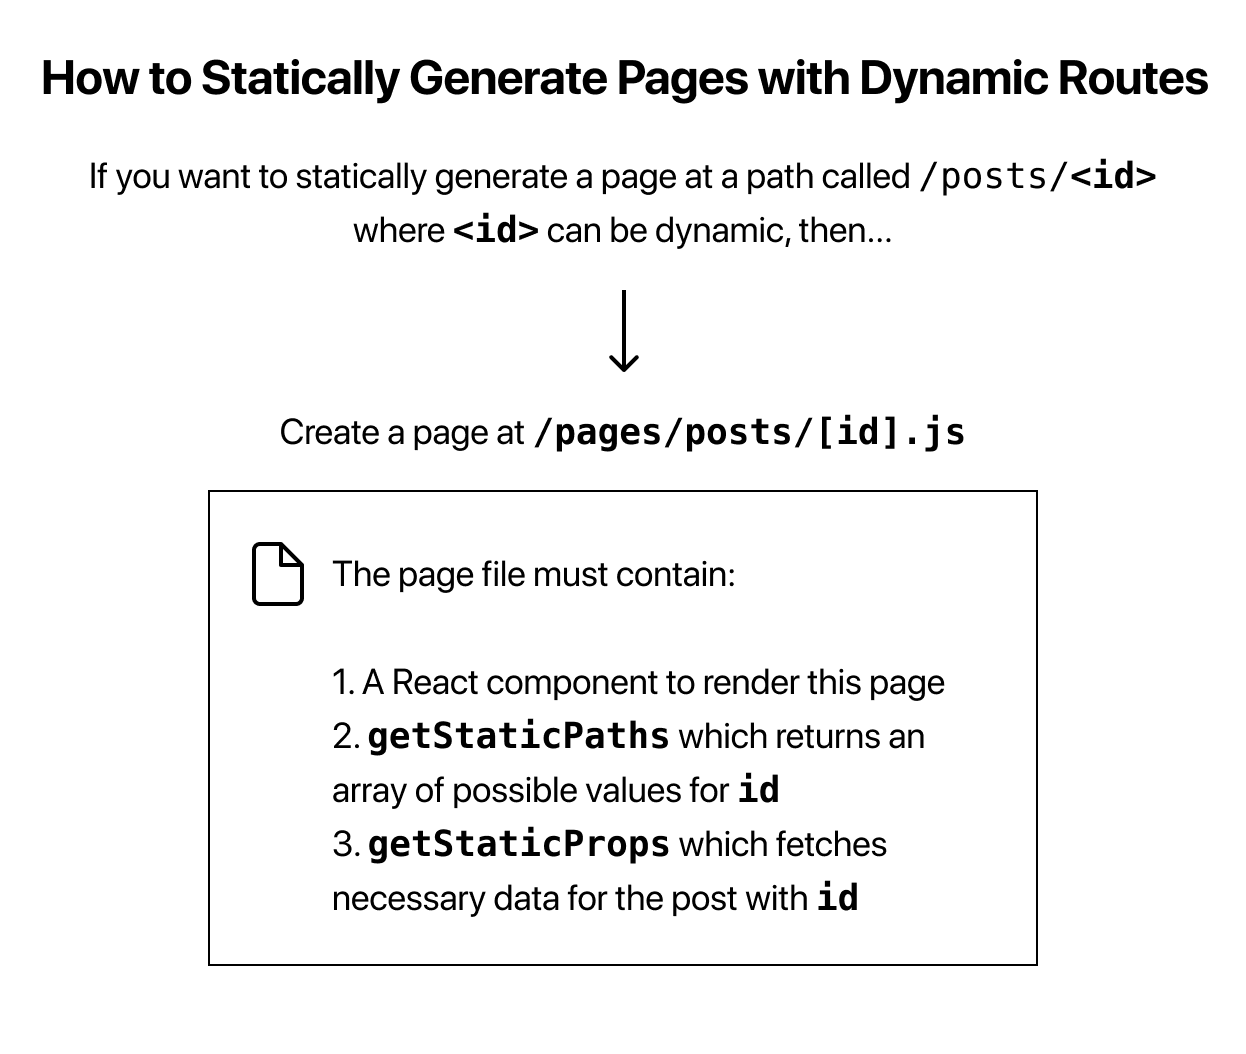 image: How to Statically Generate Pages with Dynamic Routes